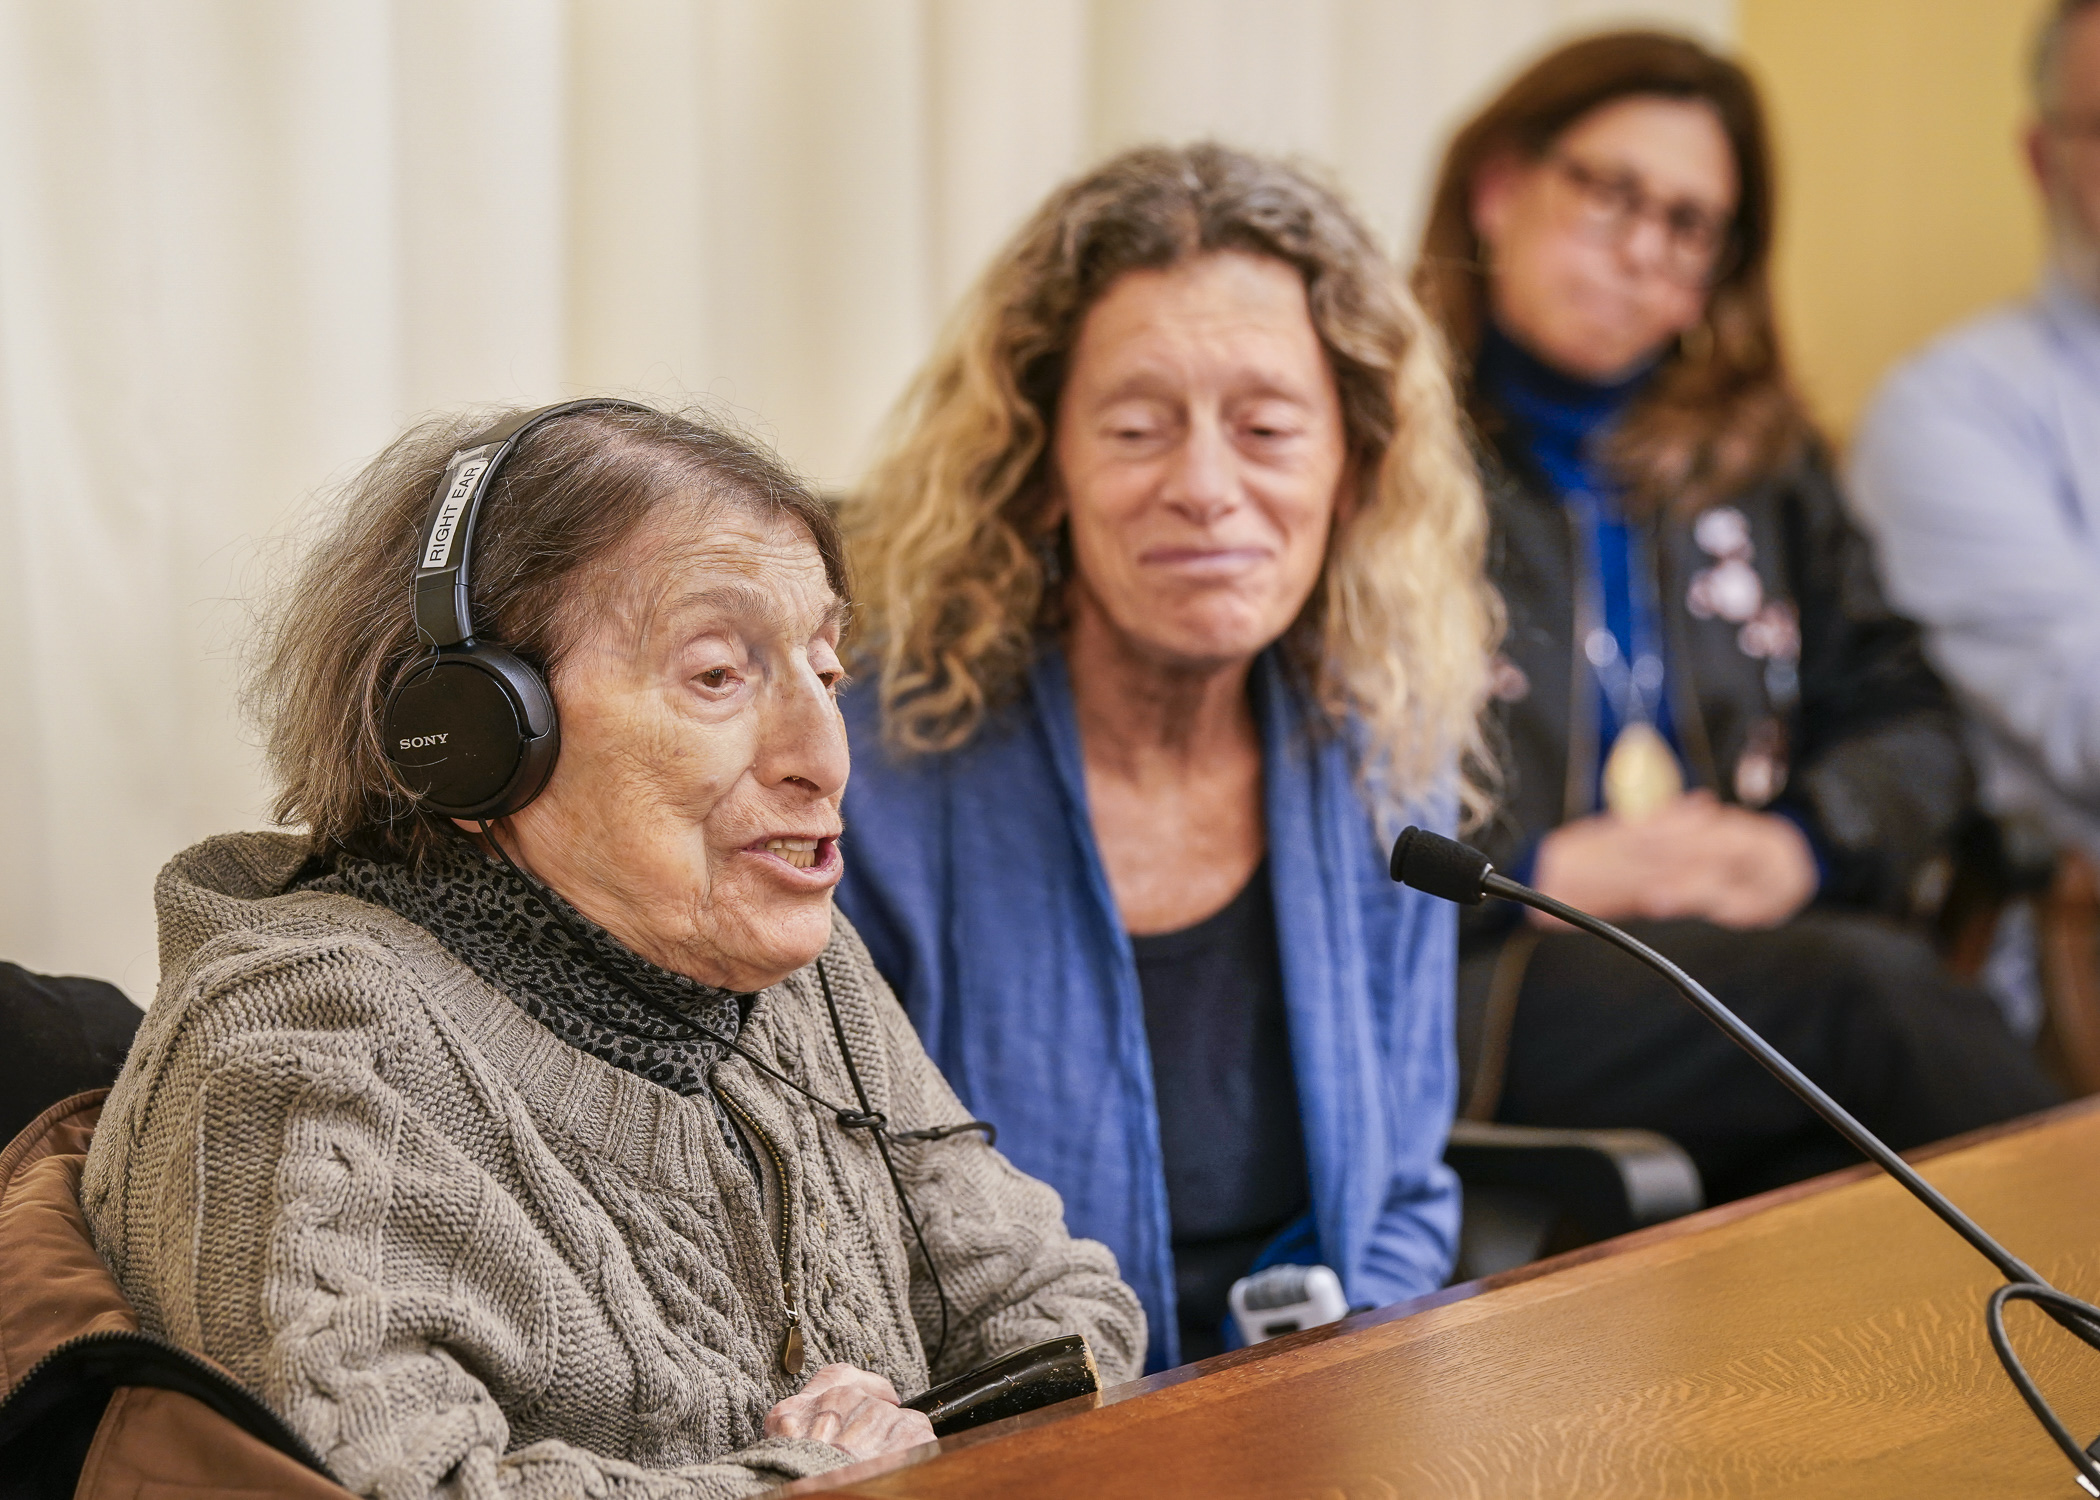 99-year-old Holocaust Survivor Dora Zaidenweber stresses the need for Holocaust and genocide education as she testifies in support of HF2685 before the House Education Policy Committee March 15. (Photo by Catherine Davis)